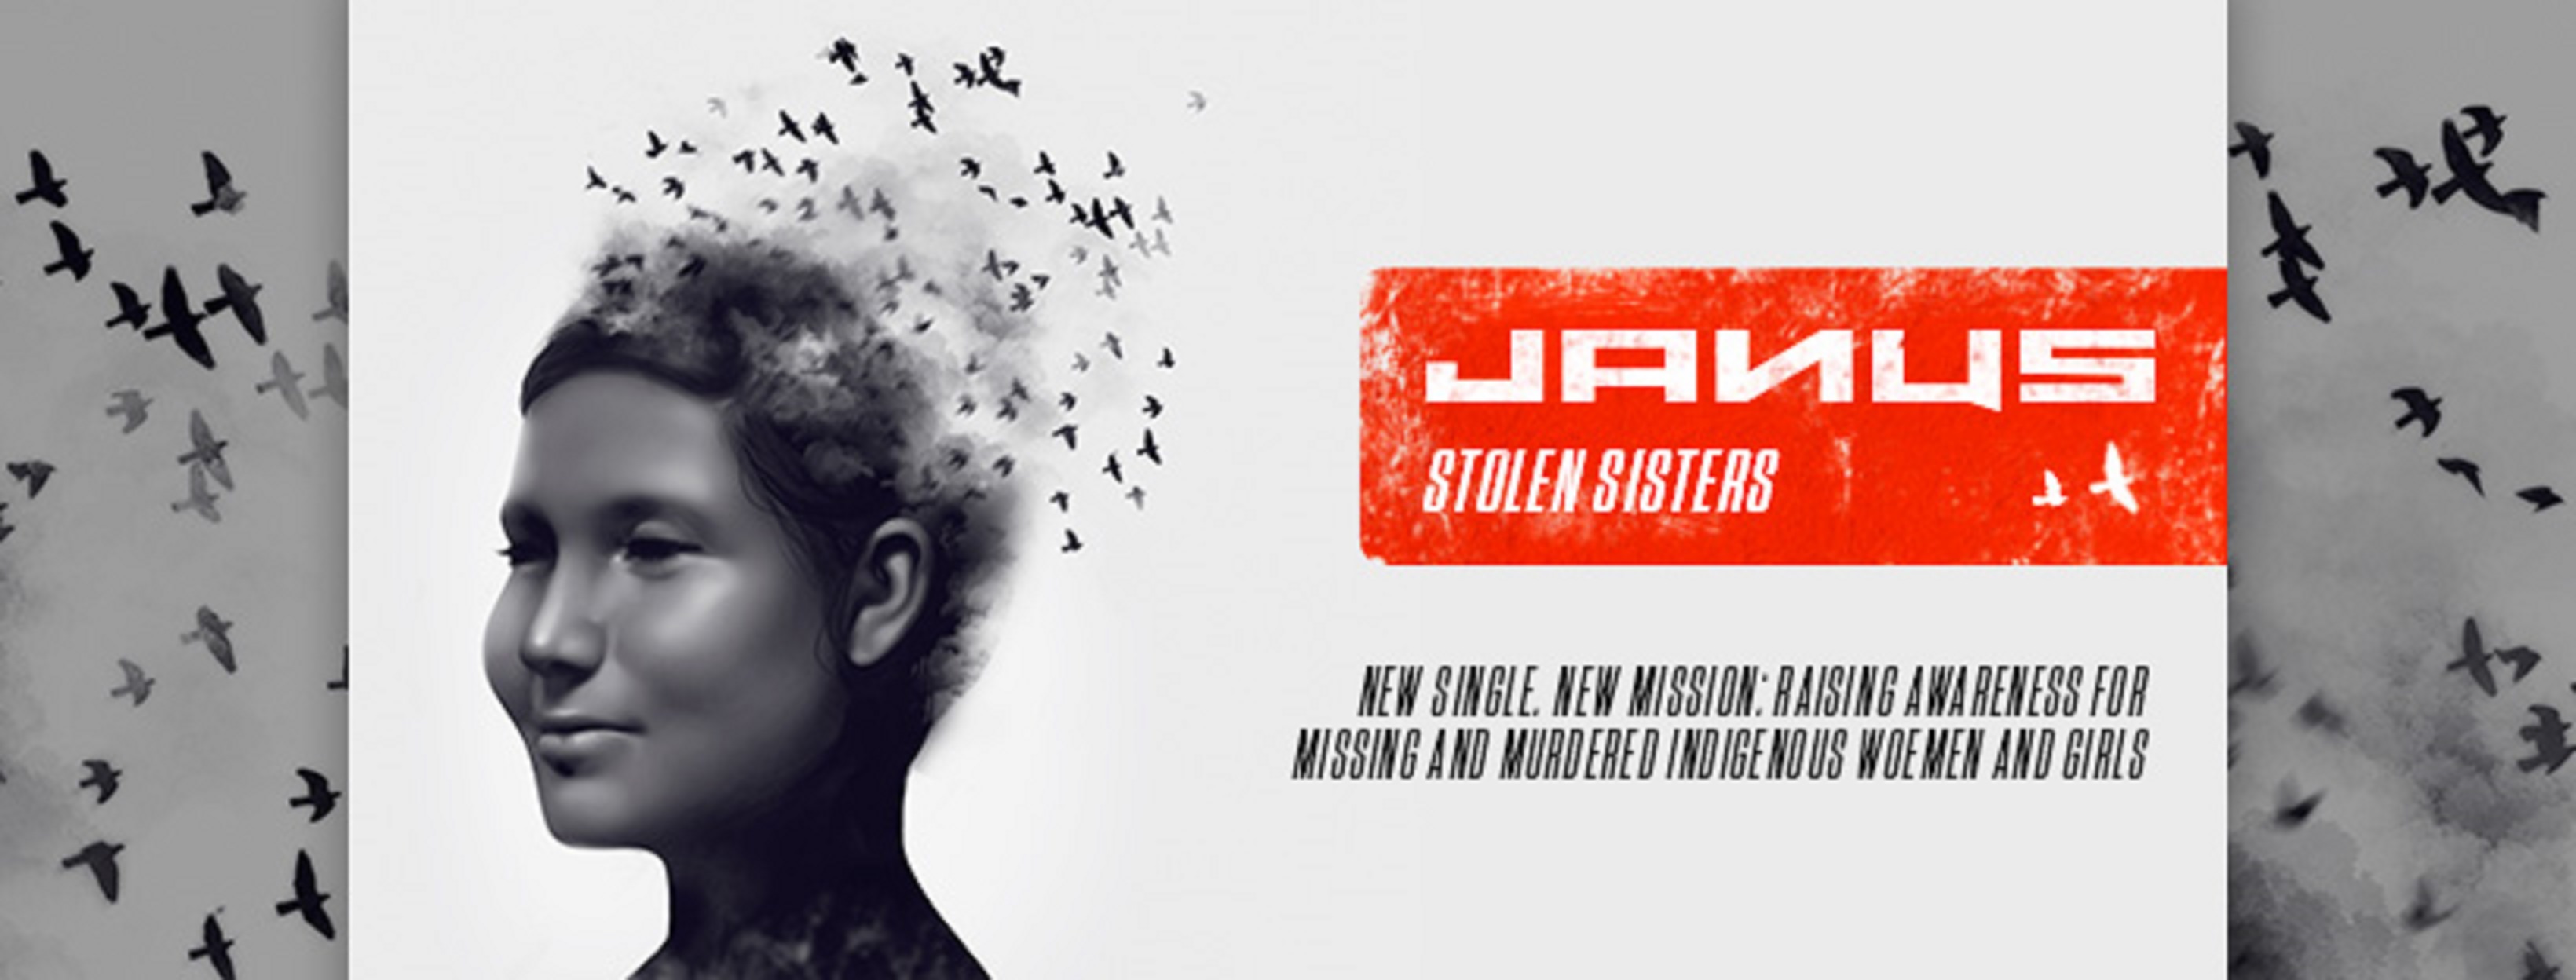 JANUS RELEASE SONG AND VIDEO ‘STOLEN SISTERS’